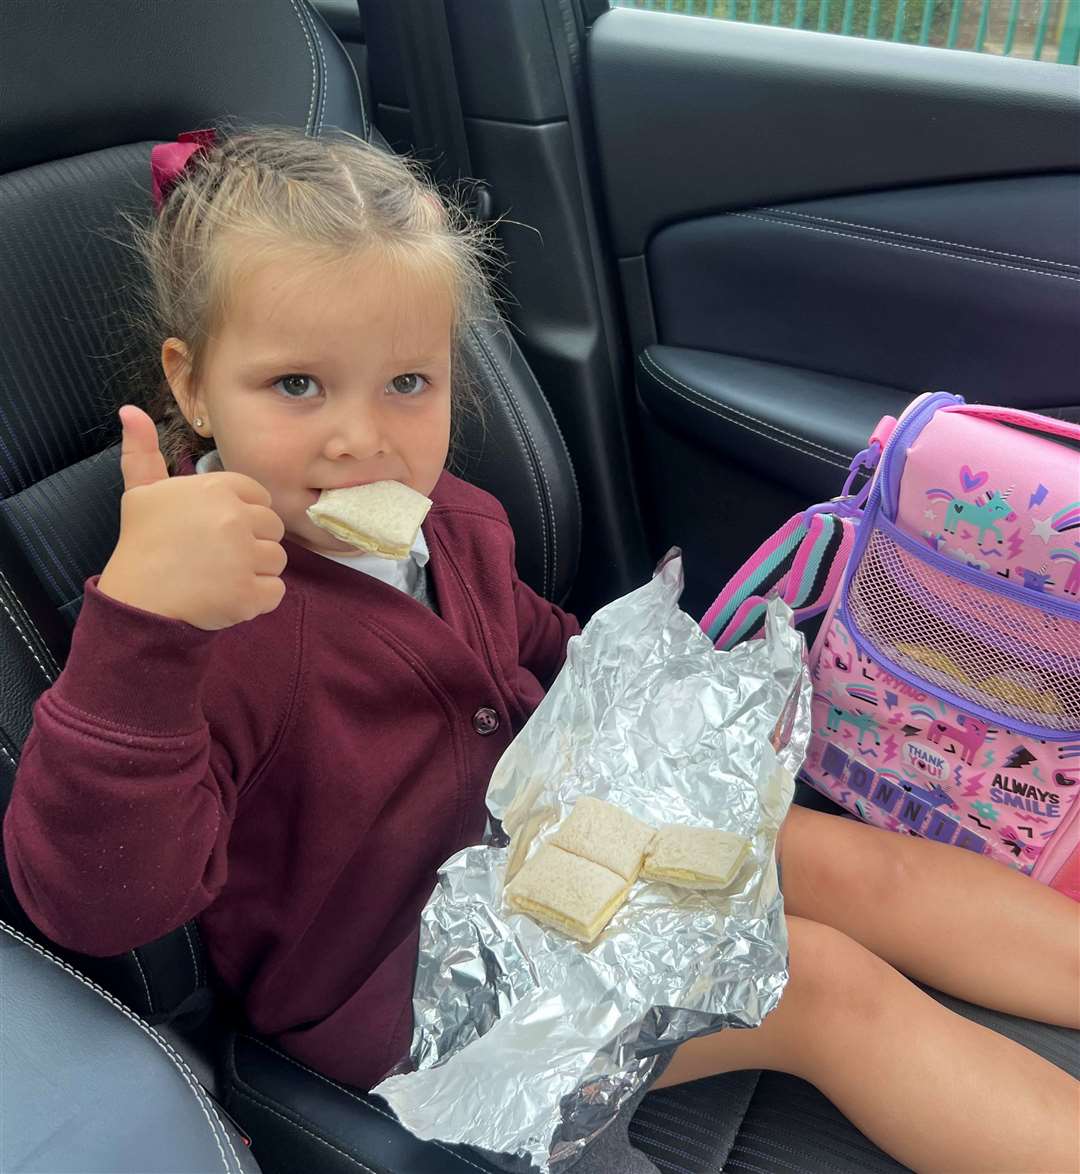 Bonnie Armitage's mum sometimes takes her out of school to eat her lunch in the car if the meal for that day is not suitable